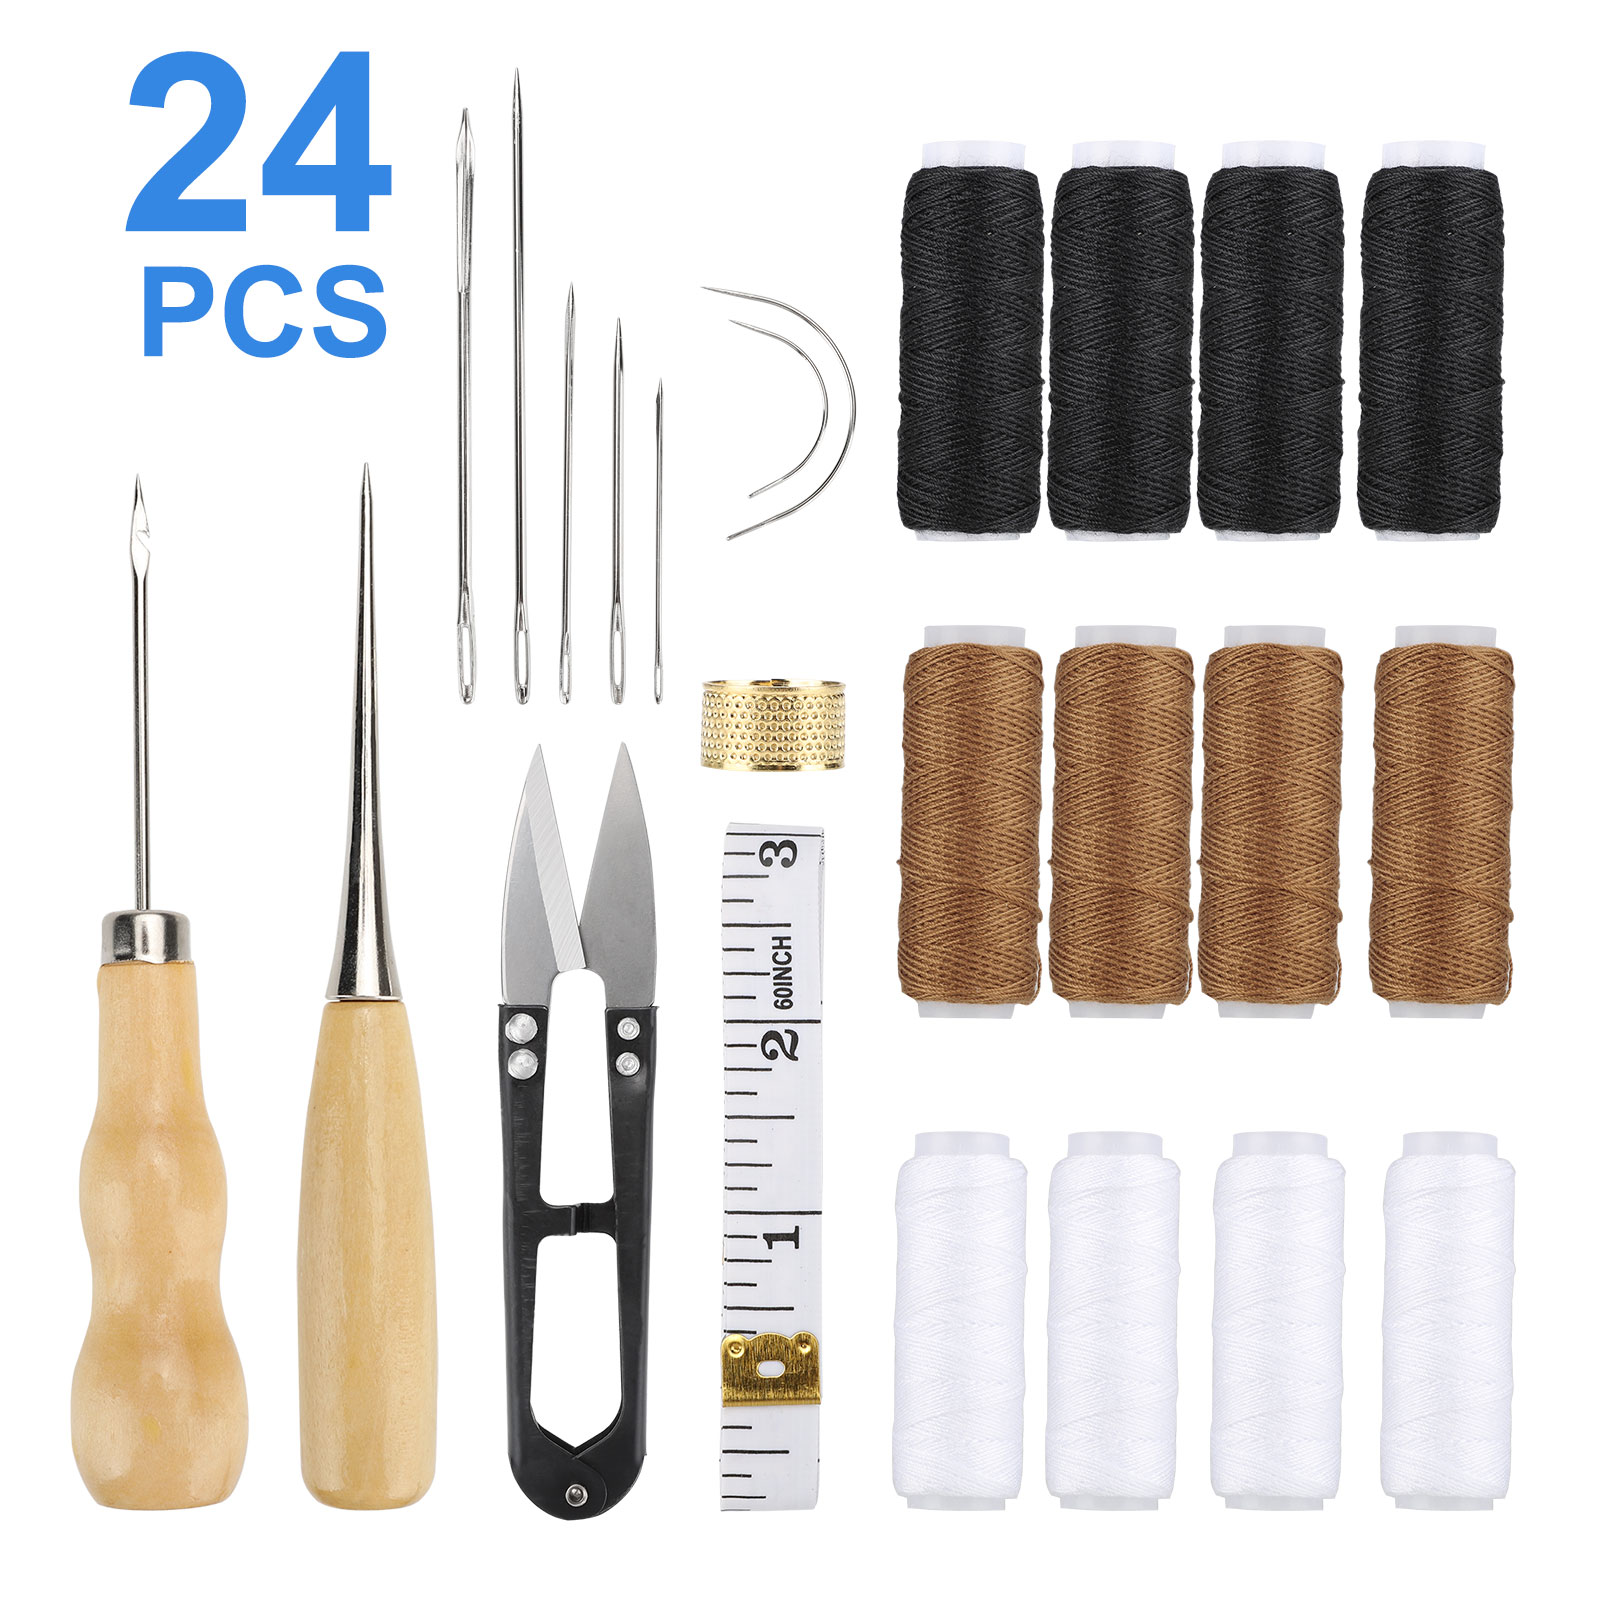 Upholstery Repair Kit 18 Pieces Upholstery Thread Assorted Hand Sewing Needles Carpet Leather Canvas DIY Tool Set